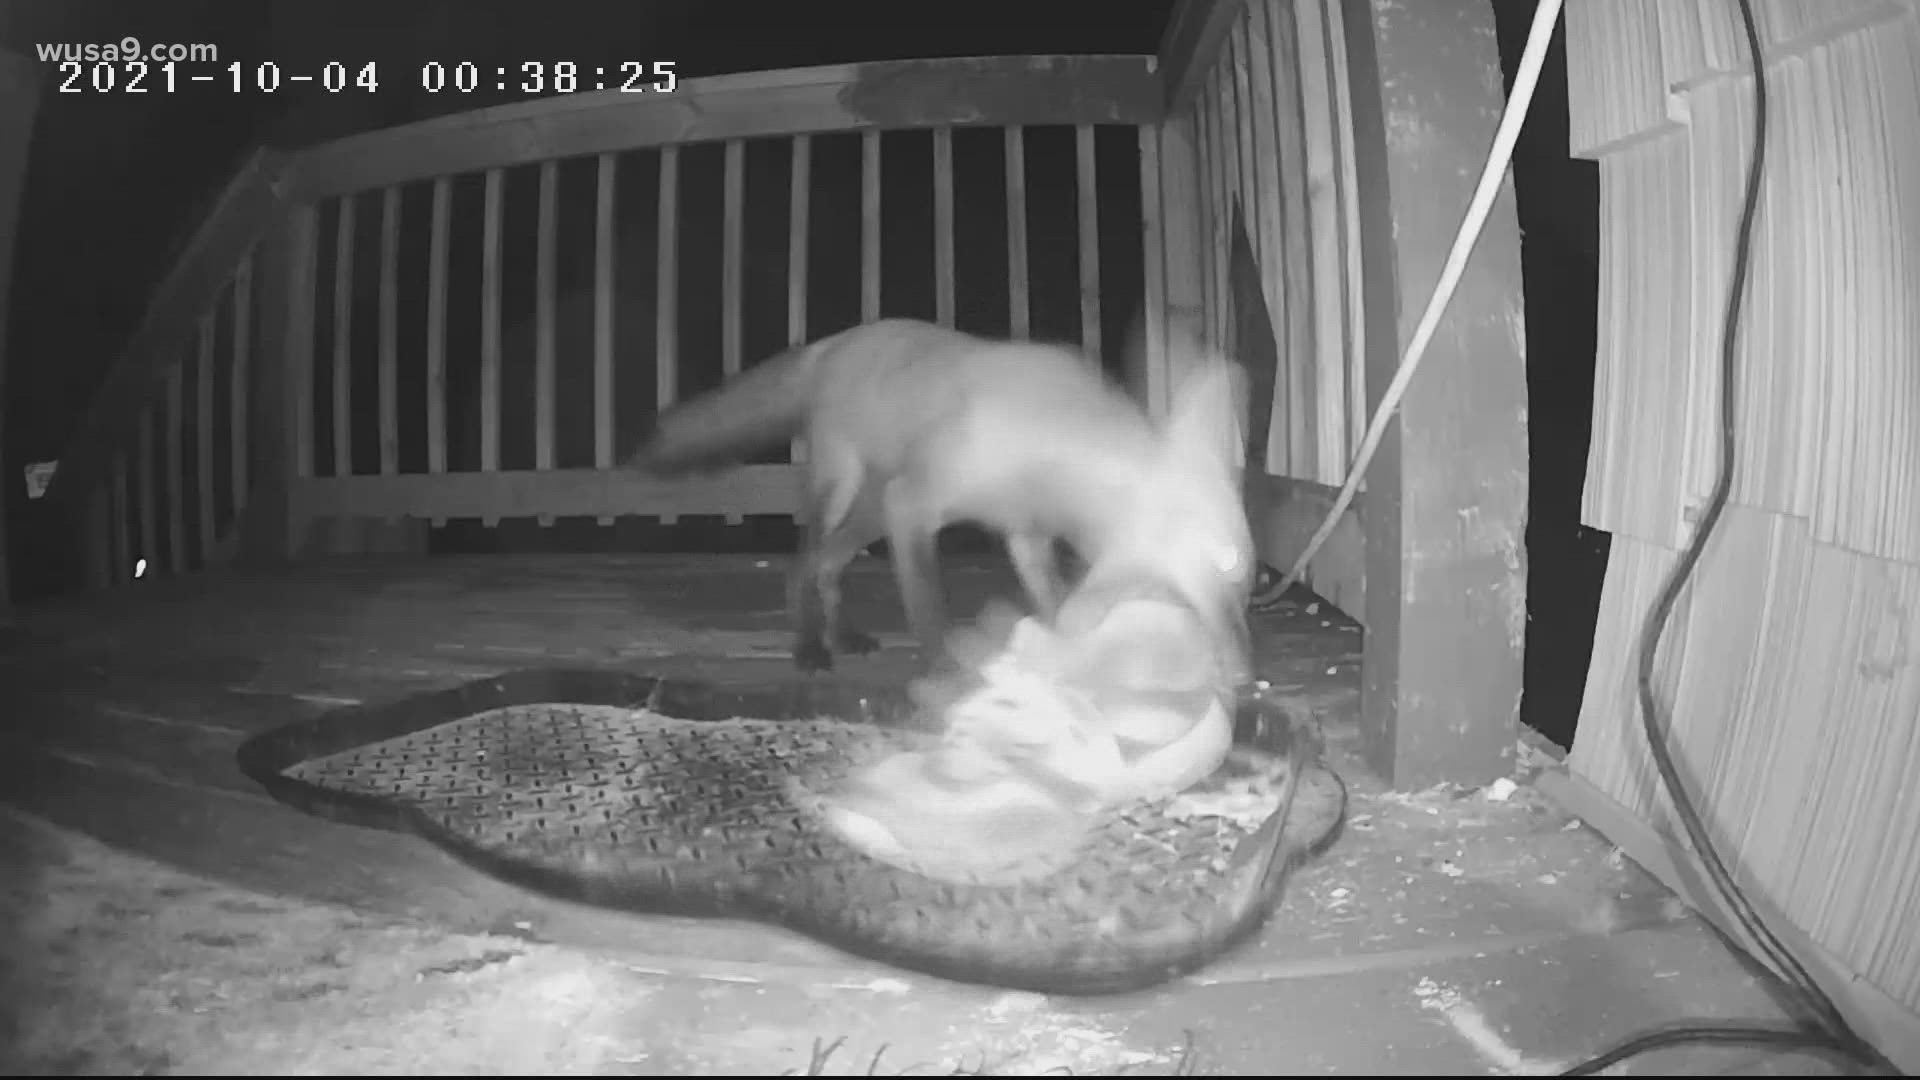 Victoria Fowler set up a surveillance camera and placed a 'bait shoe' on the porch to try to track the fox.